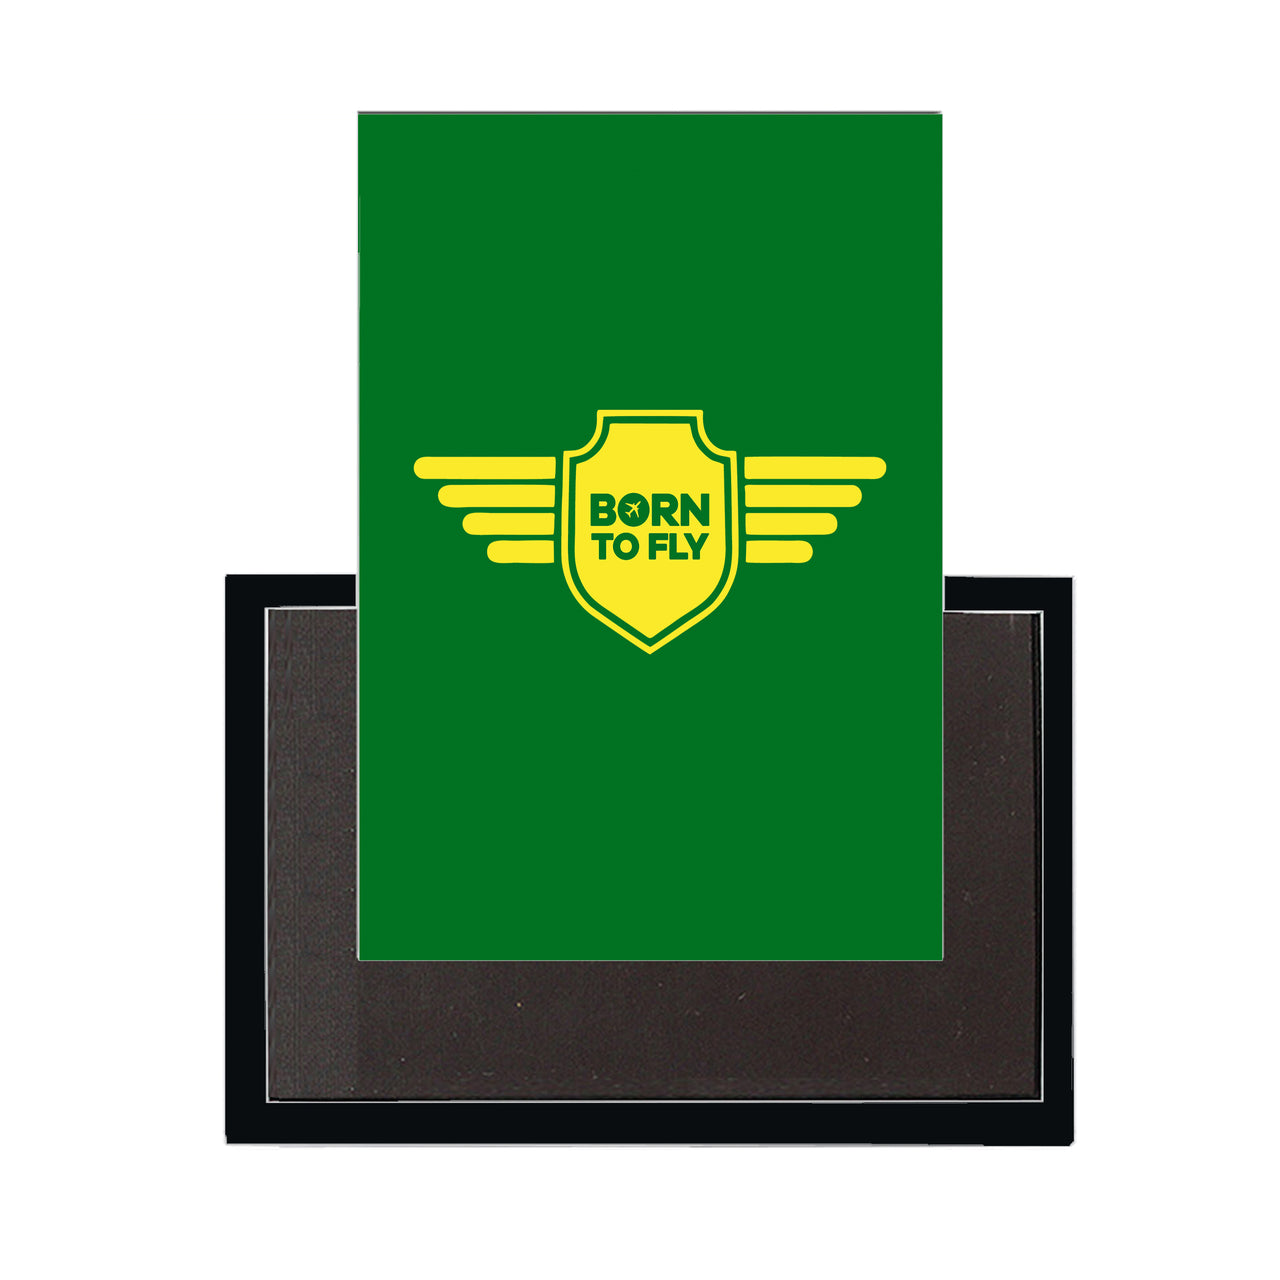 Born To Fly & Badge Designed Magnets